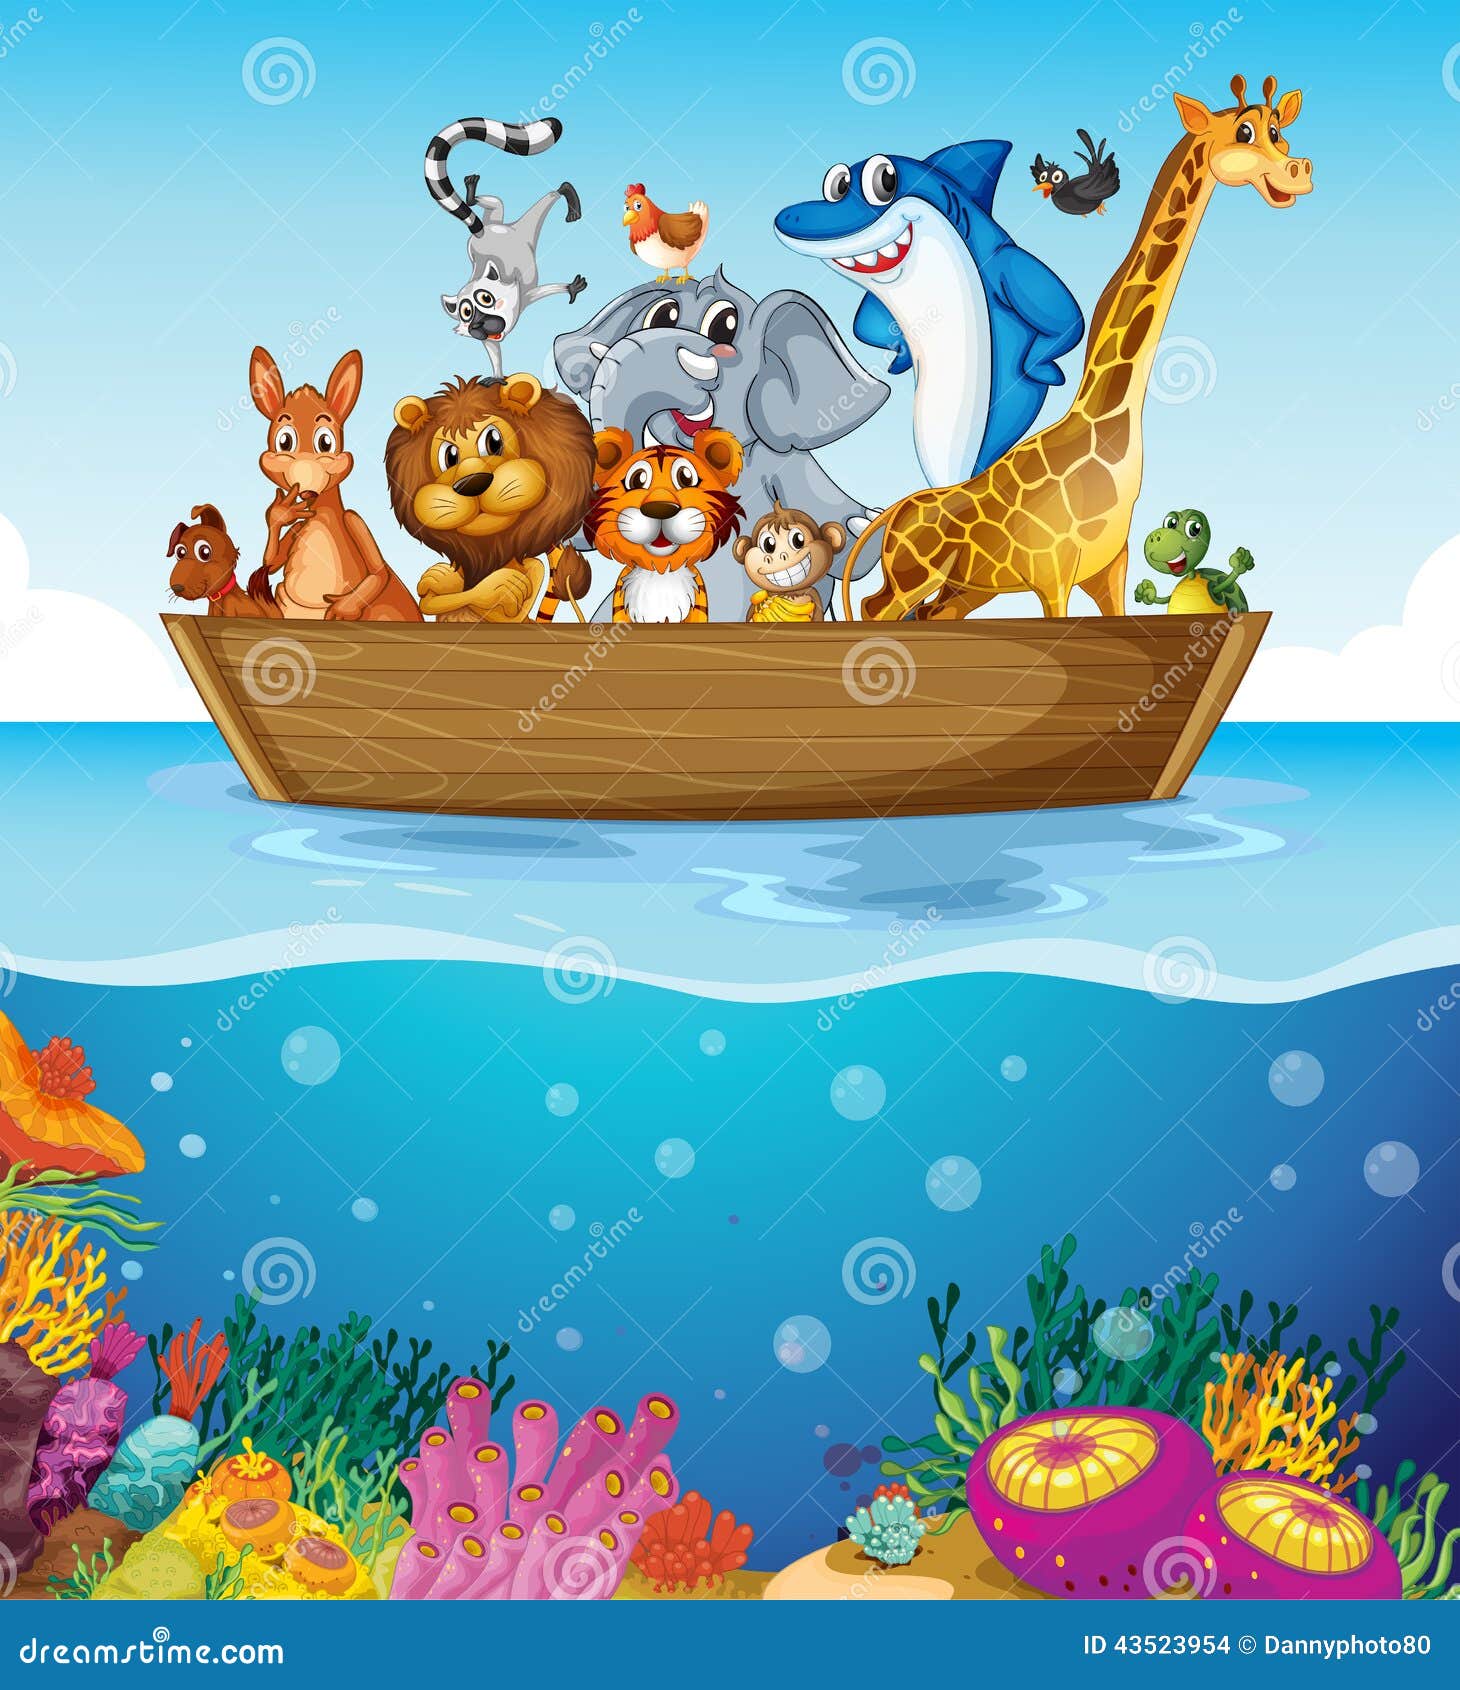 A Boat At The Sea With Animals Stock Vector - Image: 43523954